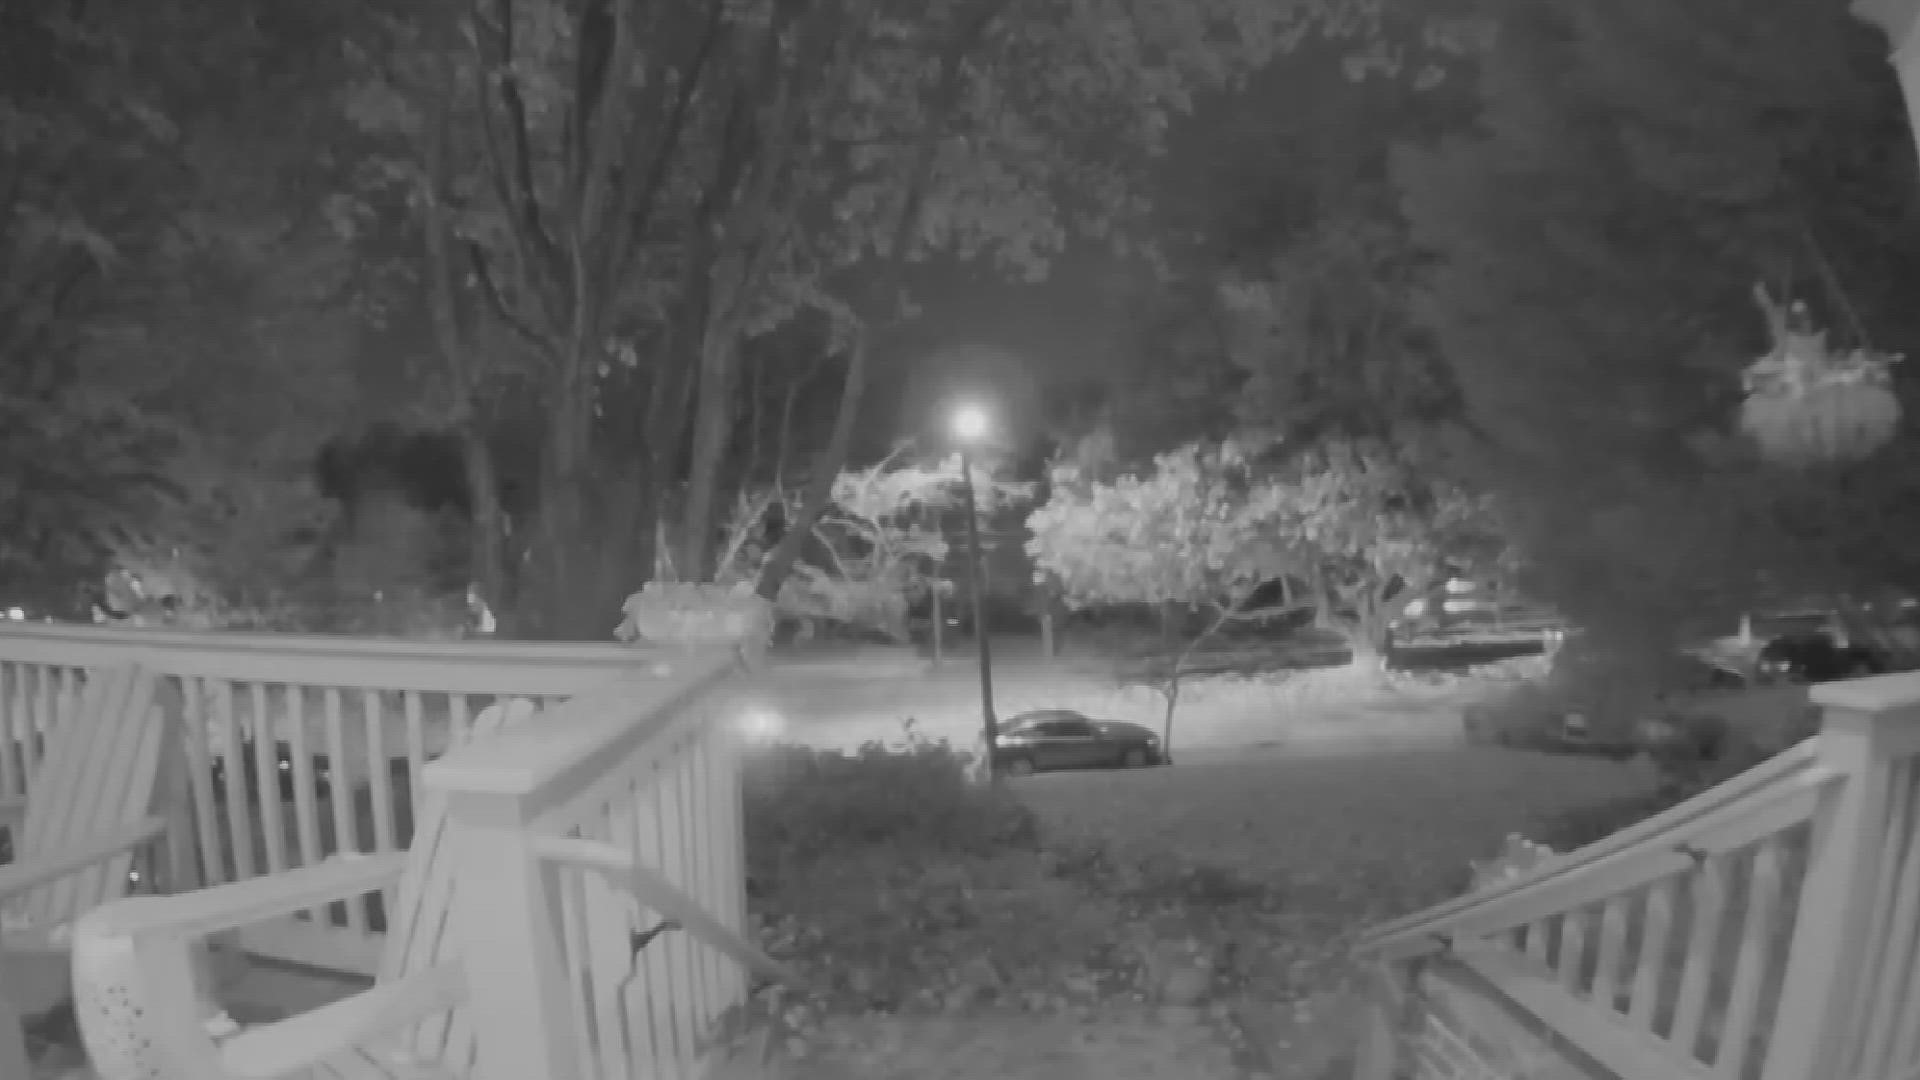 Atlanta Police Department needs help in finding a suspect vehicle involved in a hit-and-run in the Virginia-Highland neighborhood.